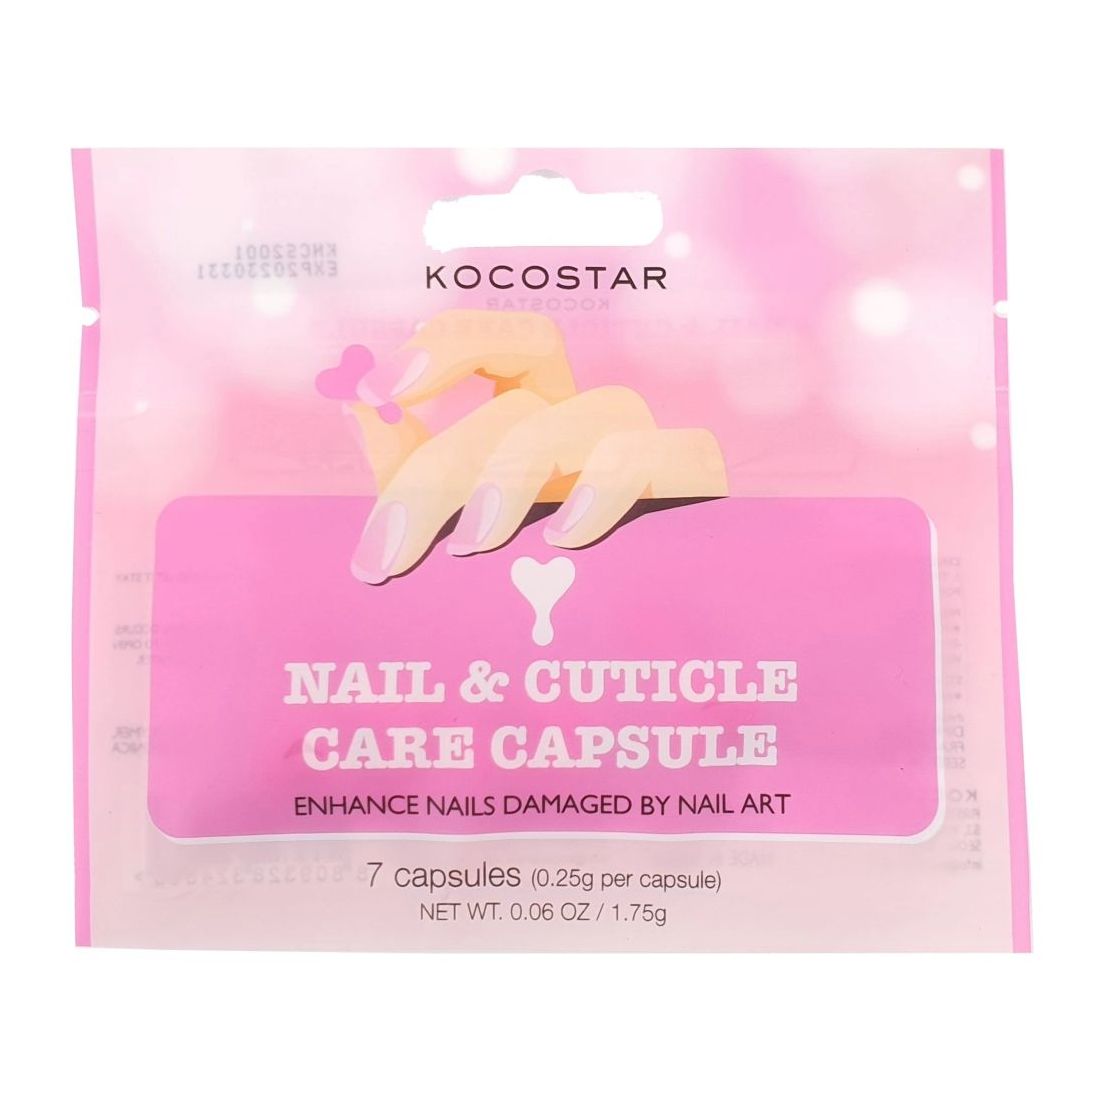 Kocostar Nail & Cuticle Care Capsule Mask Pouch Type